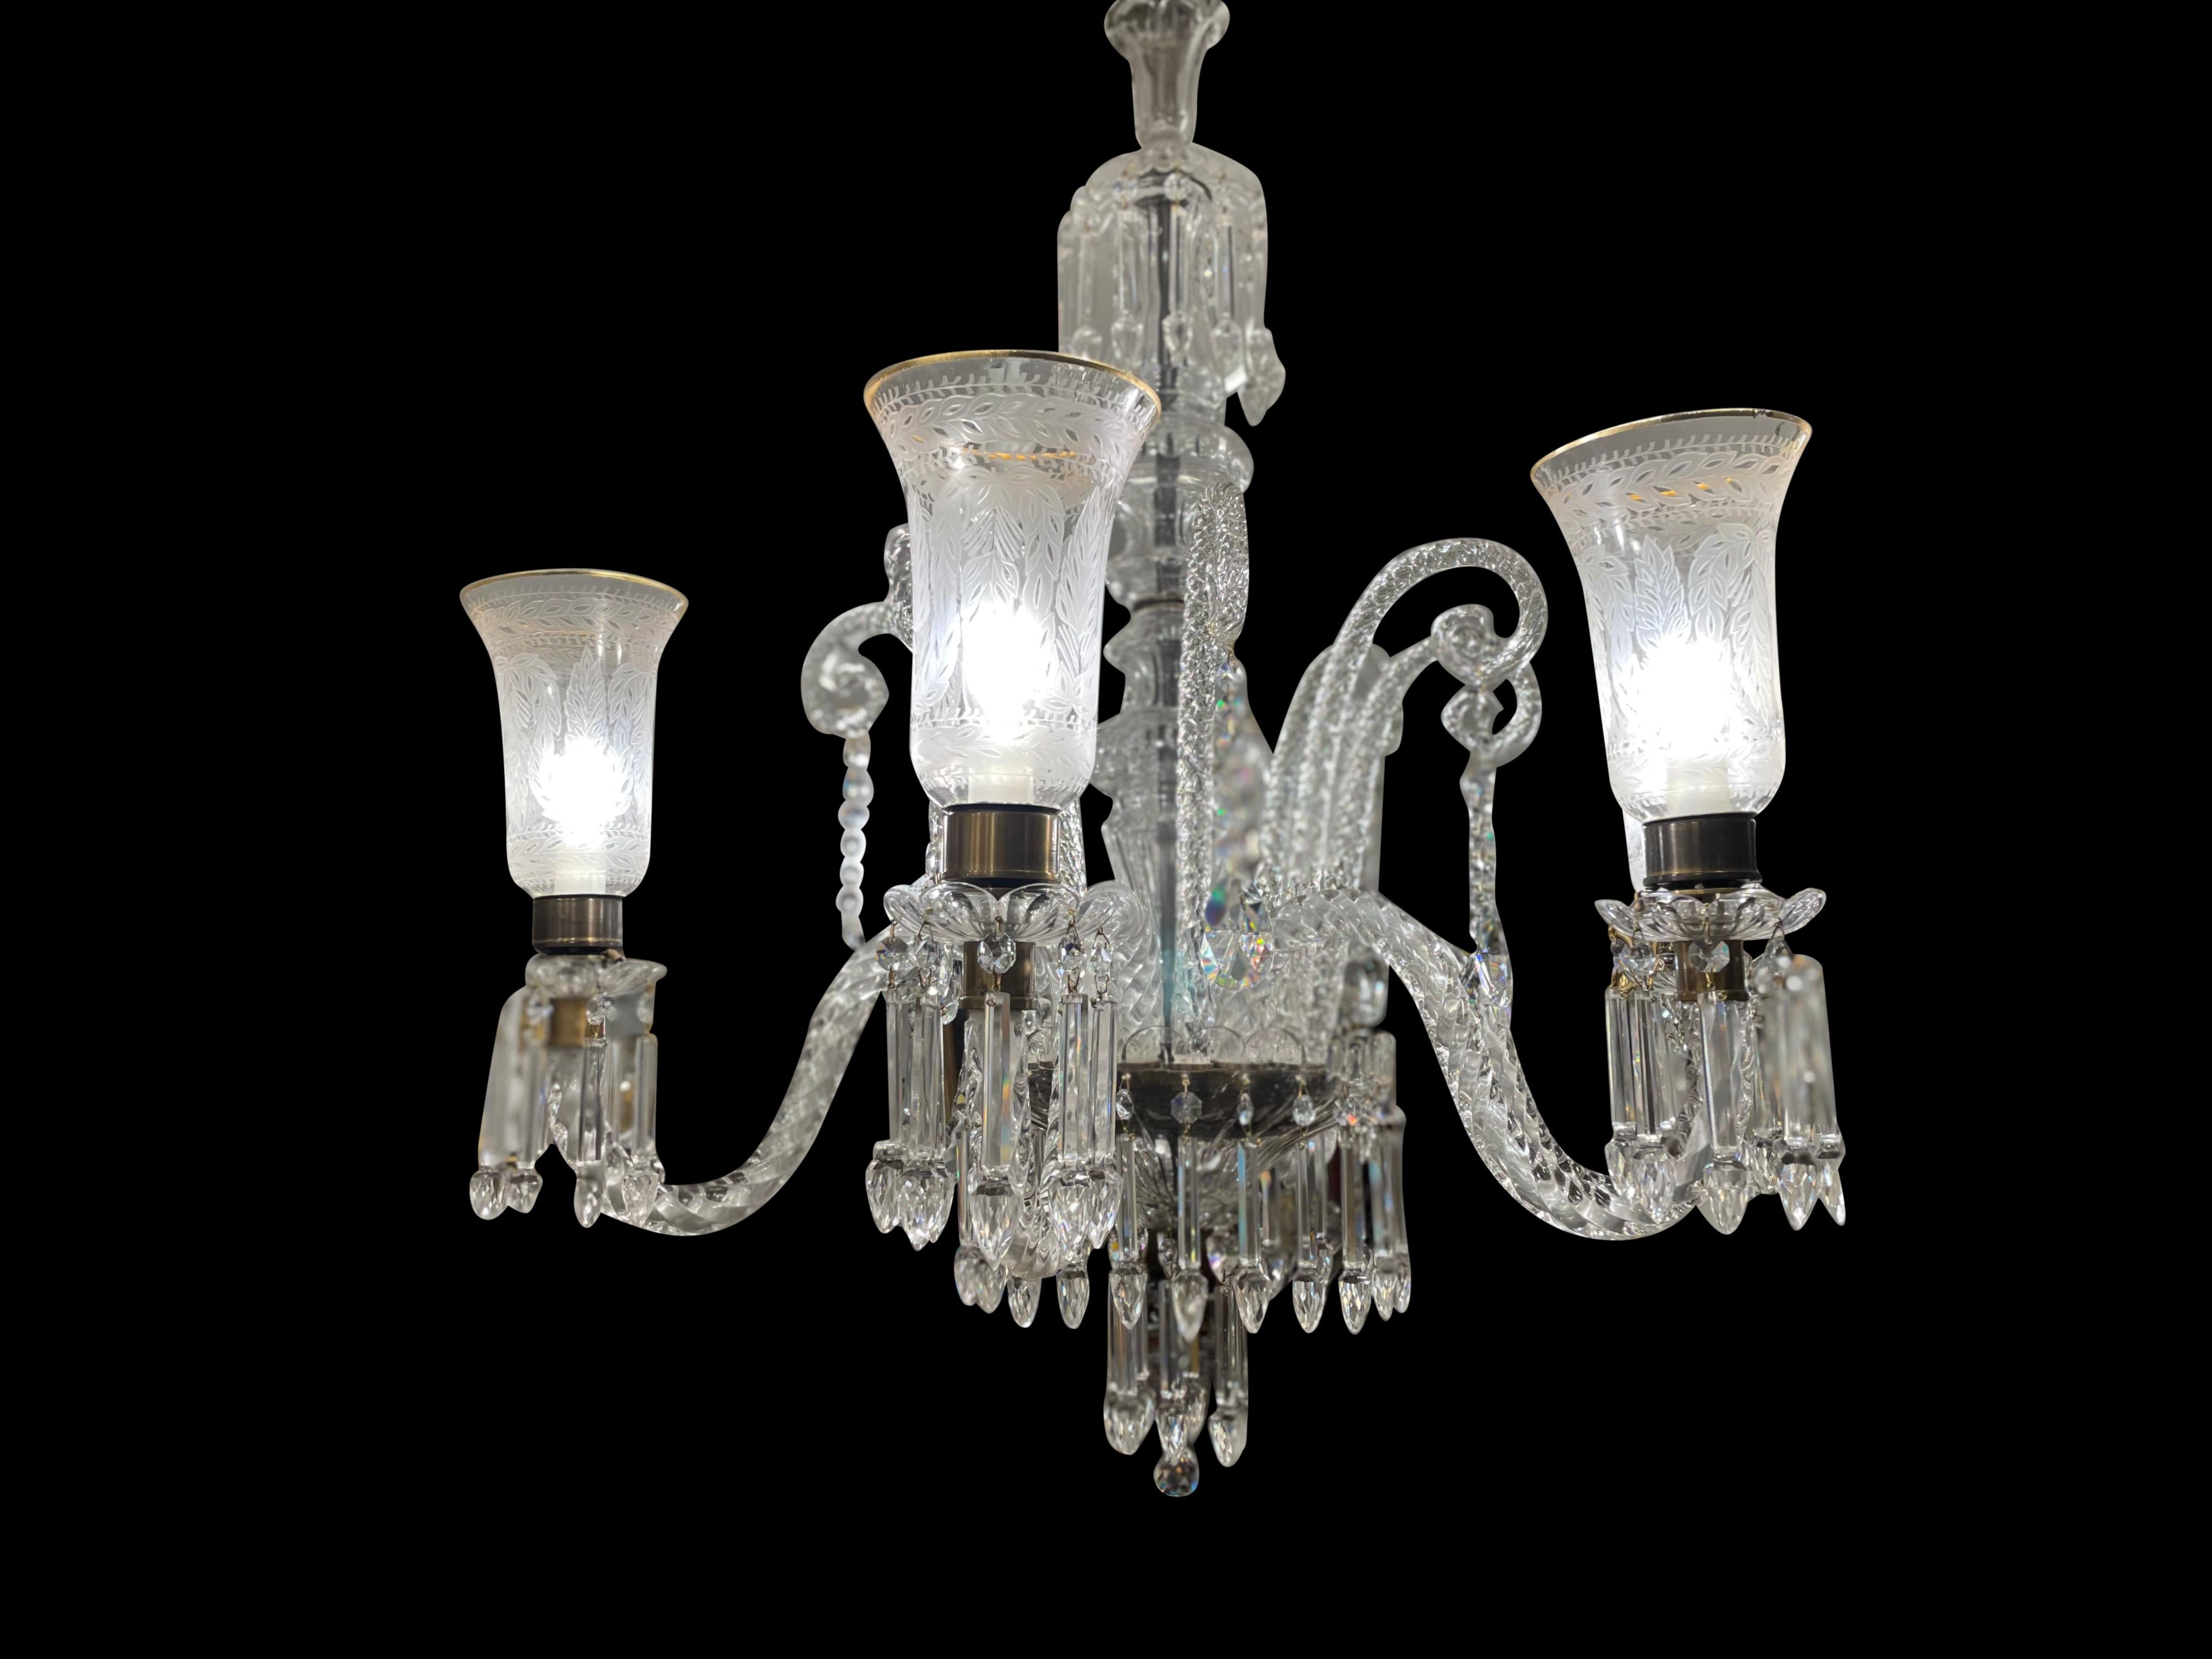 Cut Crystal Chandelier with Engraved Hurricane Shades, 20th Century For Sale 2